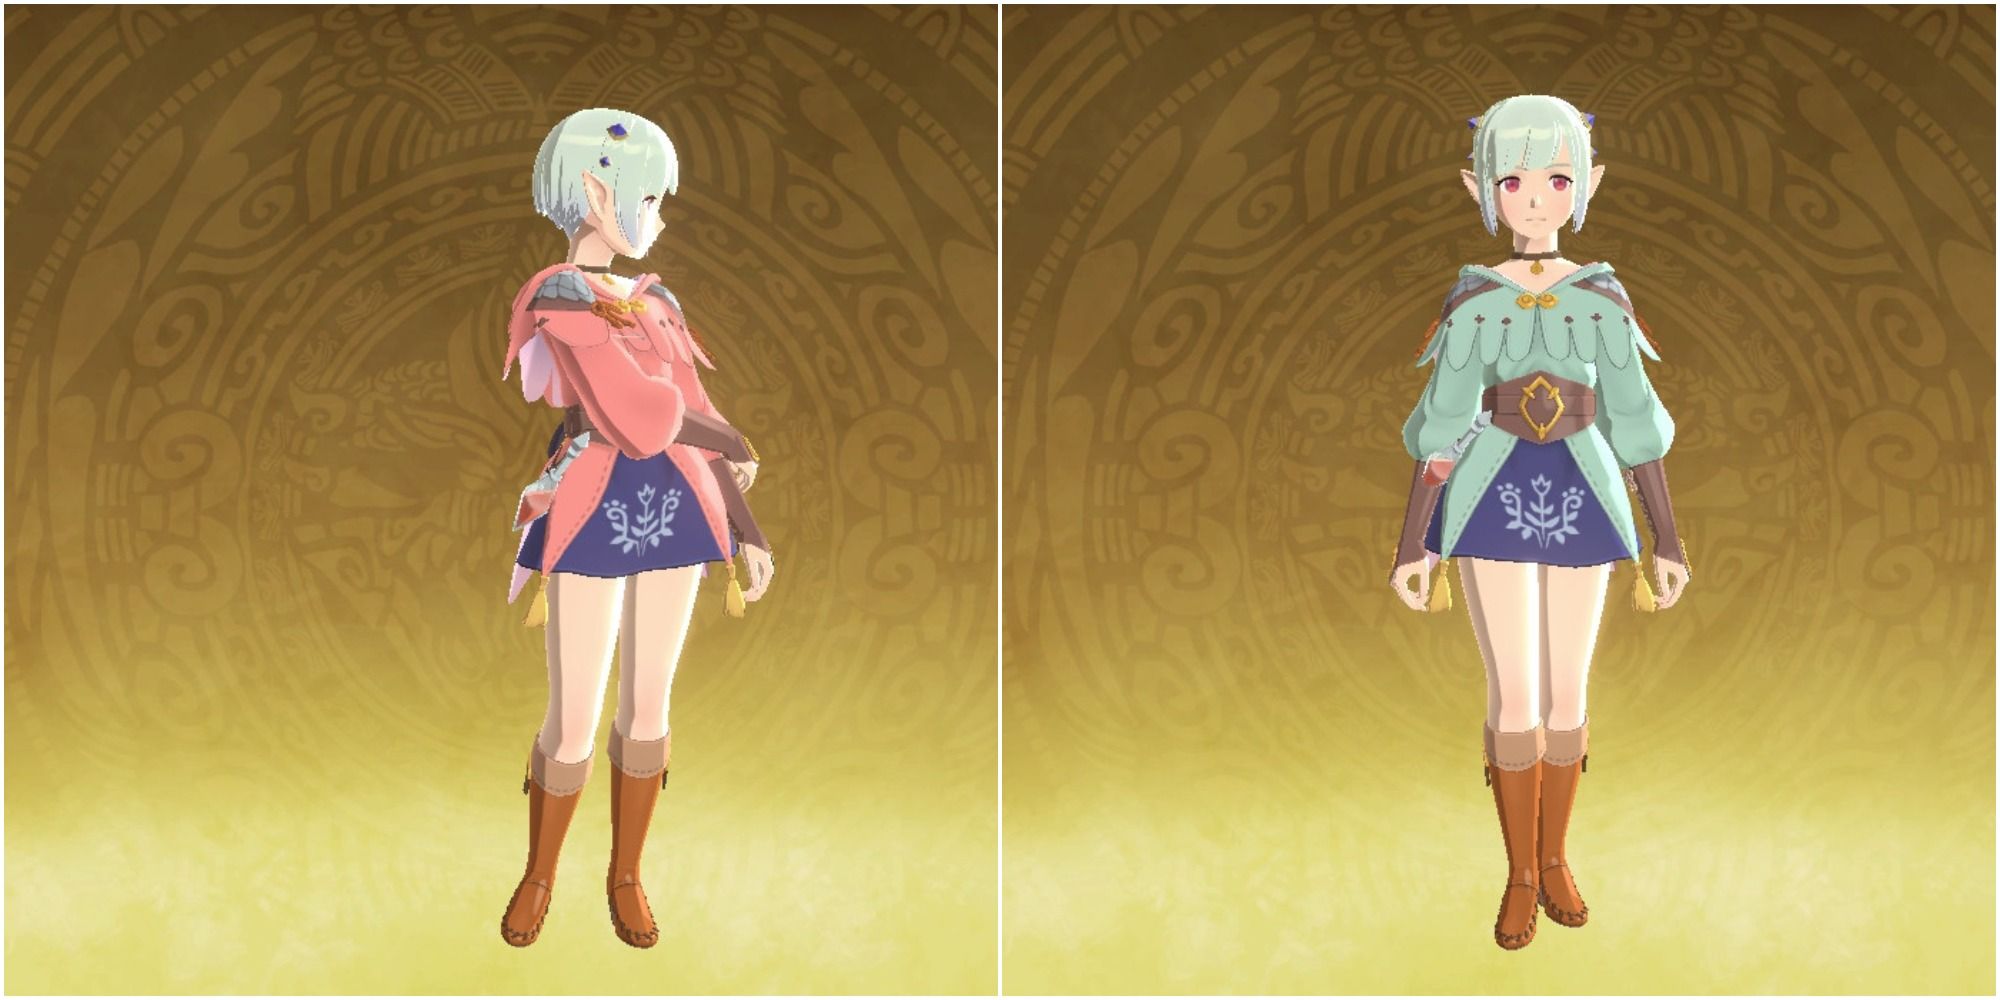 Monster Hunter Stories 2 Ena Traveling Gear Outfits